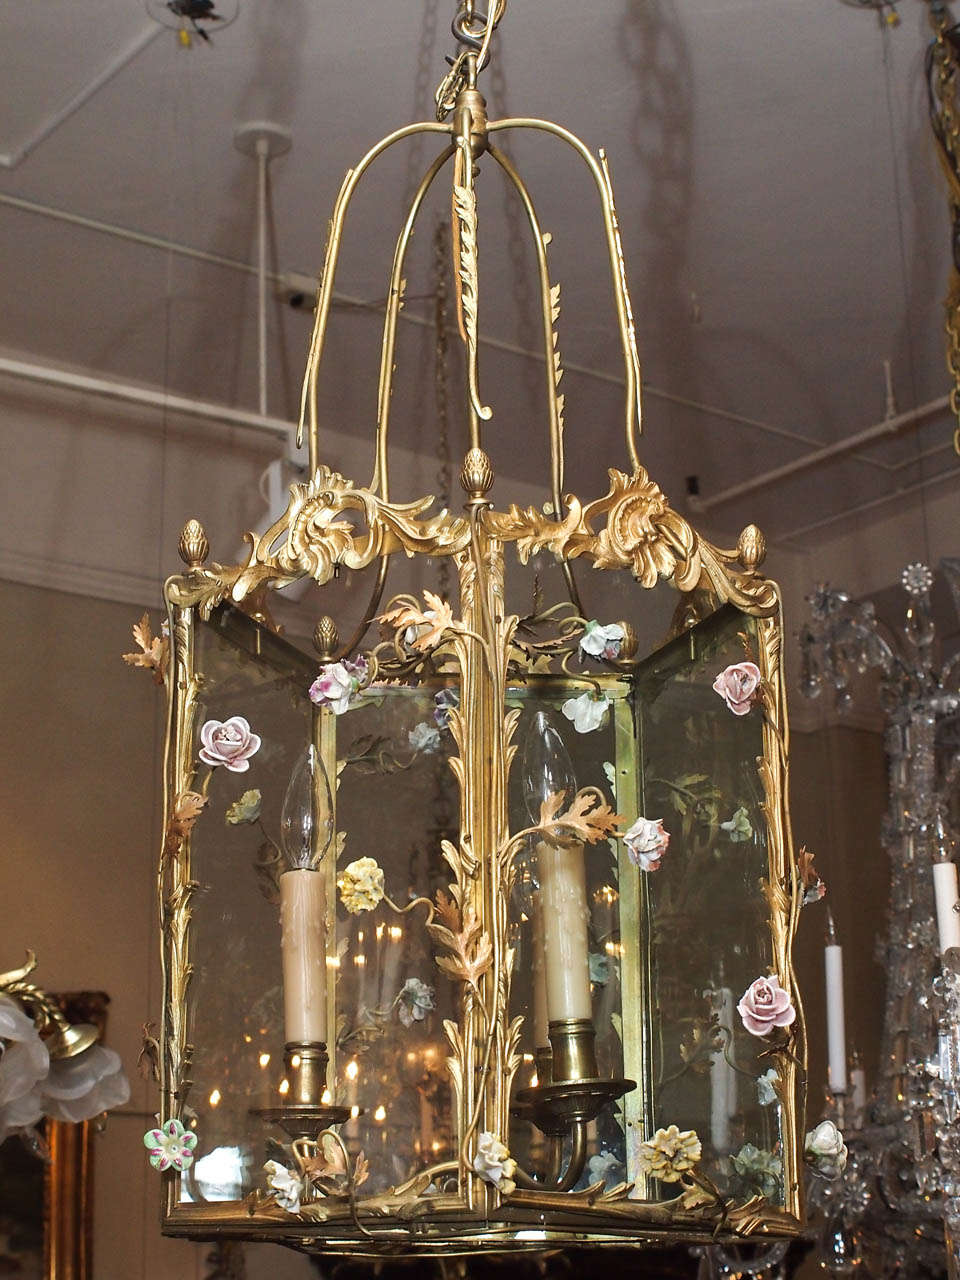 Antique French bronze lantern with saxe flowers circa 1890's.